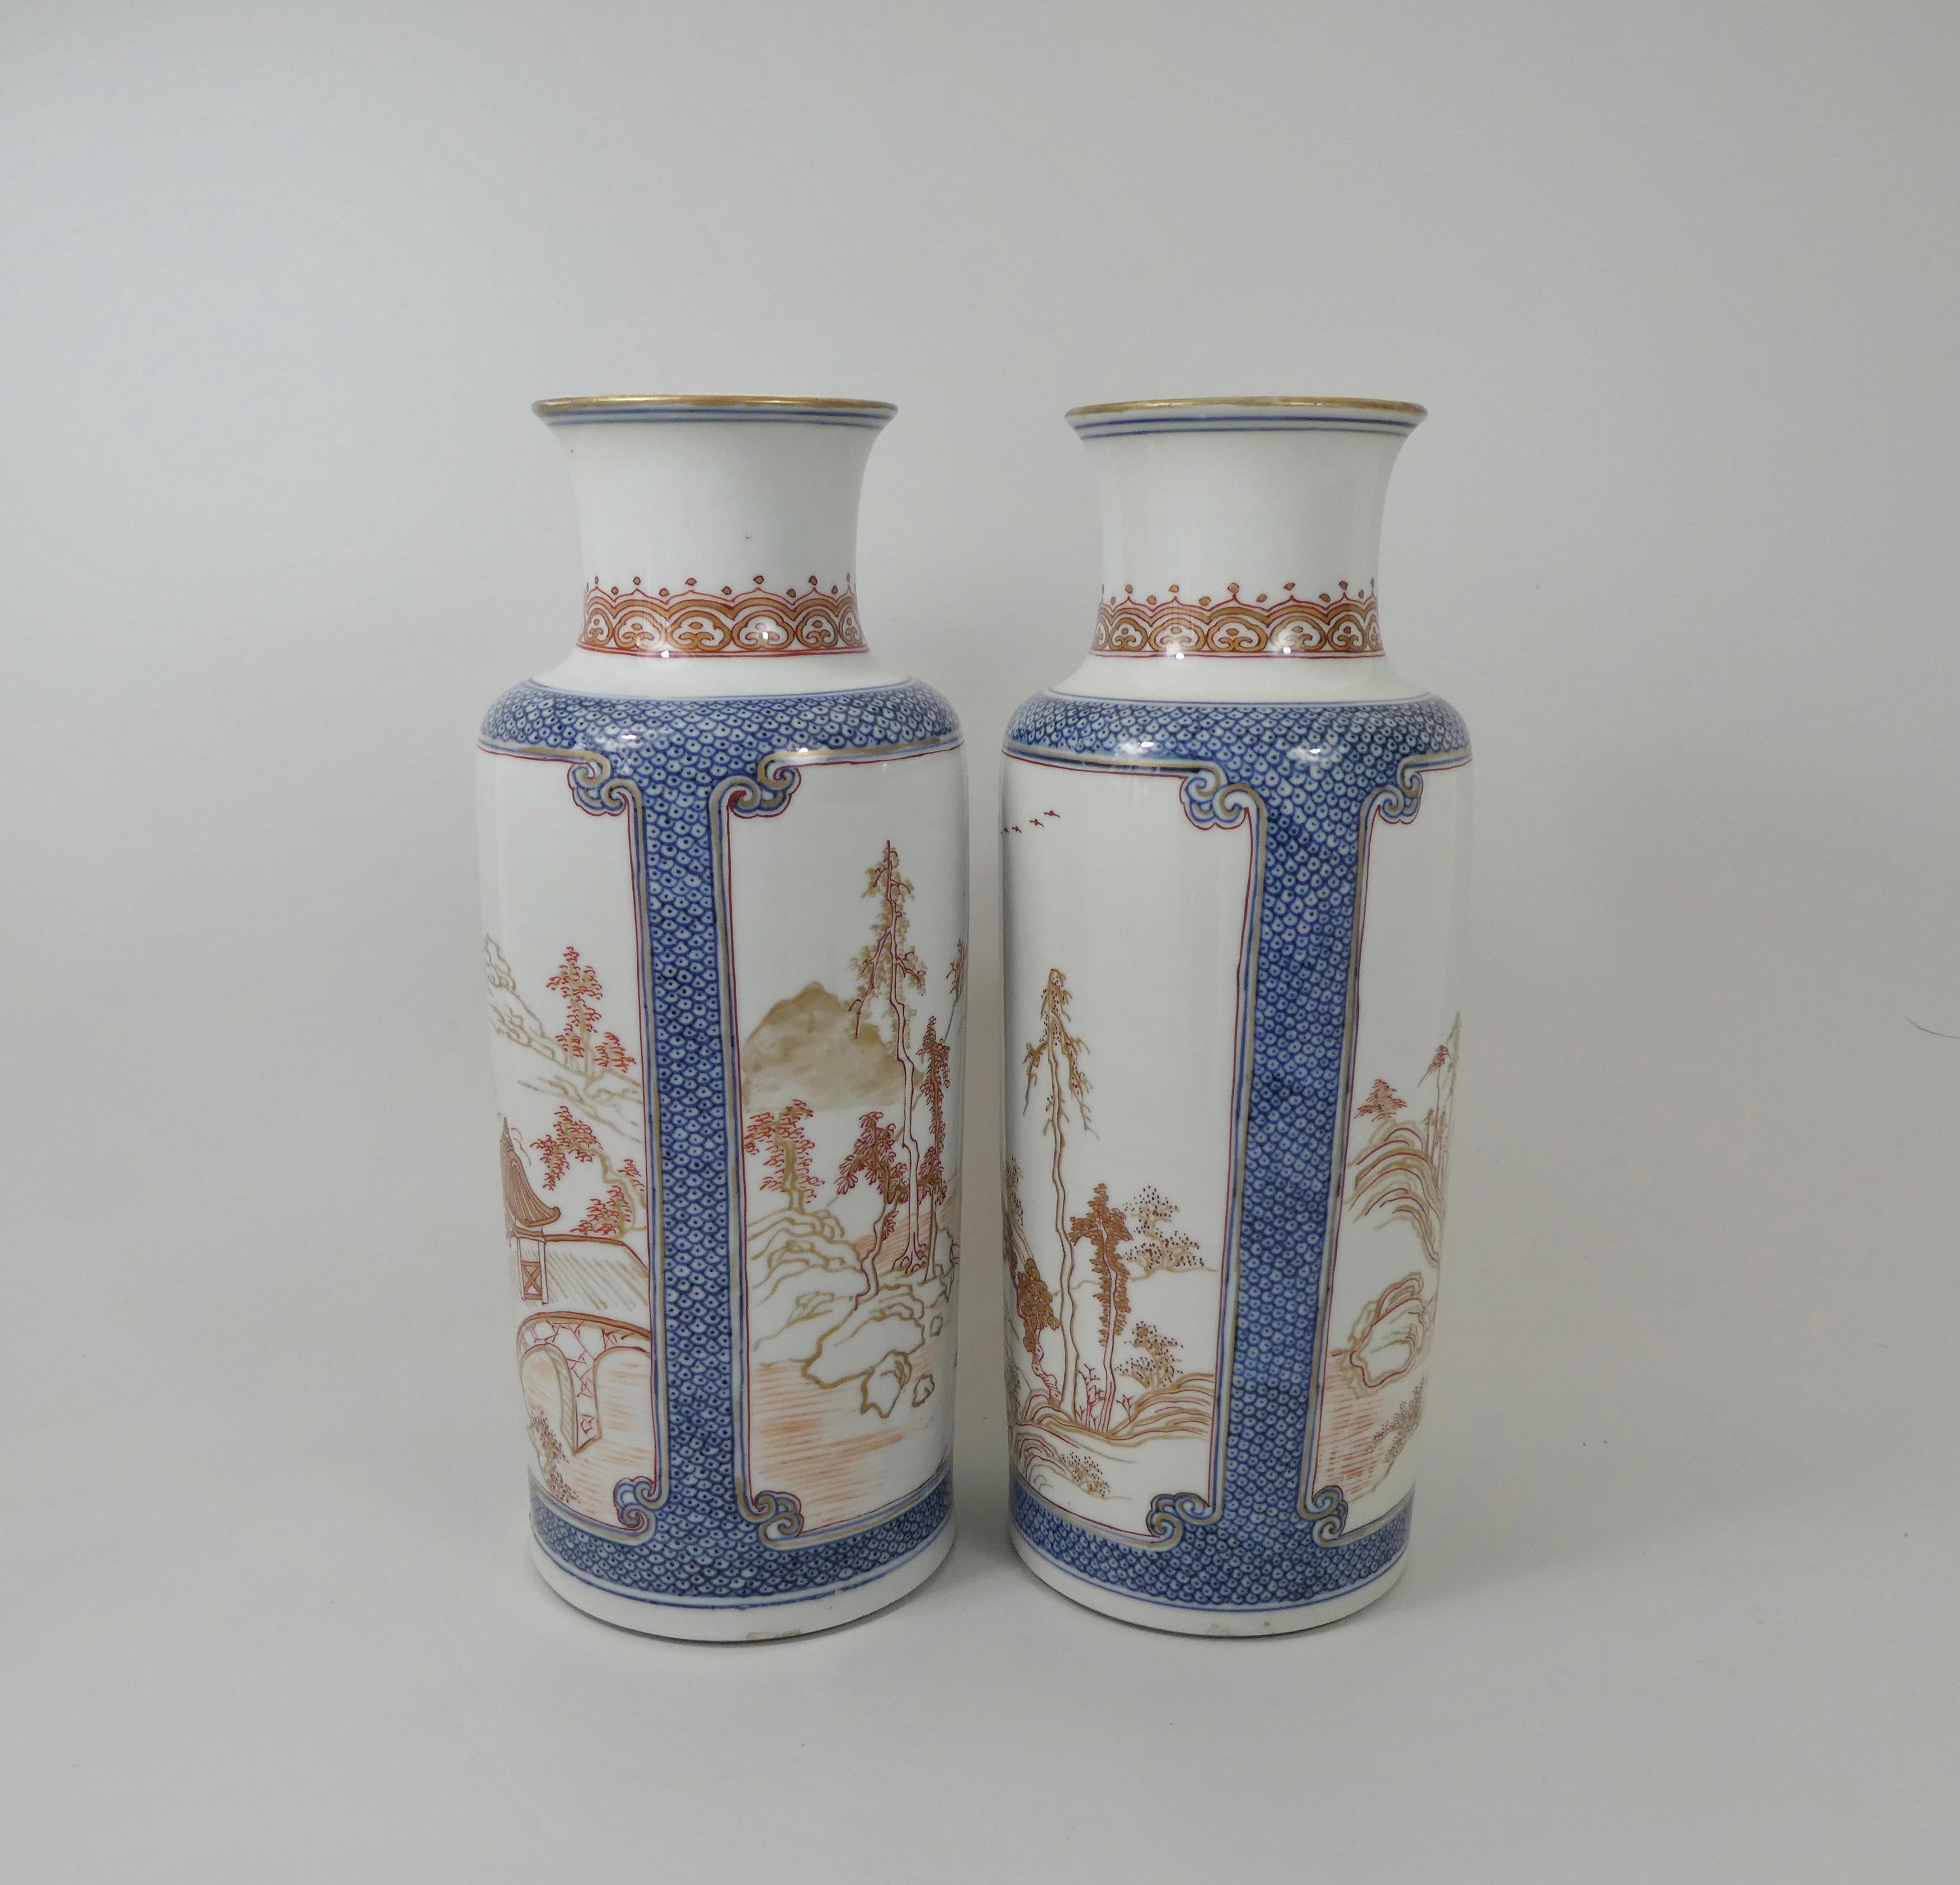 Pair of Chinese Porcelain ‘Rouge de Fer’ Decorated Vases, c. 1700. Kangxi. 10